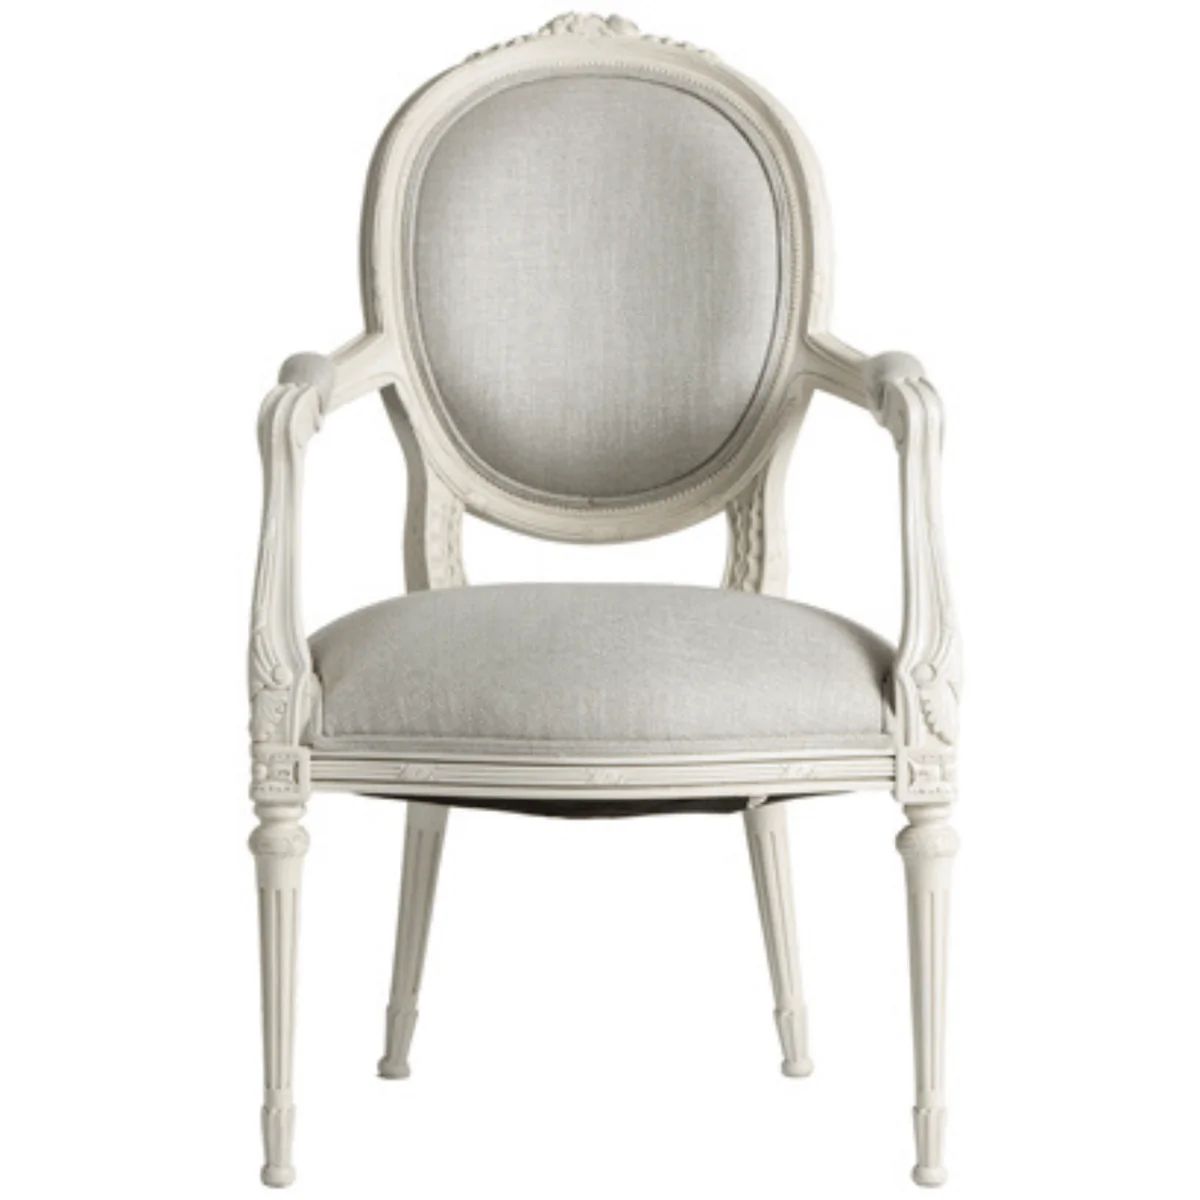 French Style Hand-Carved Arm Chair With Grey Linen Upholstery | The Well Appointed House, LLC